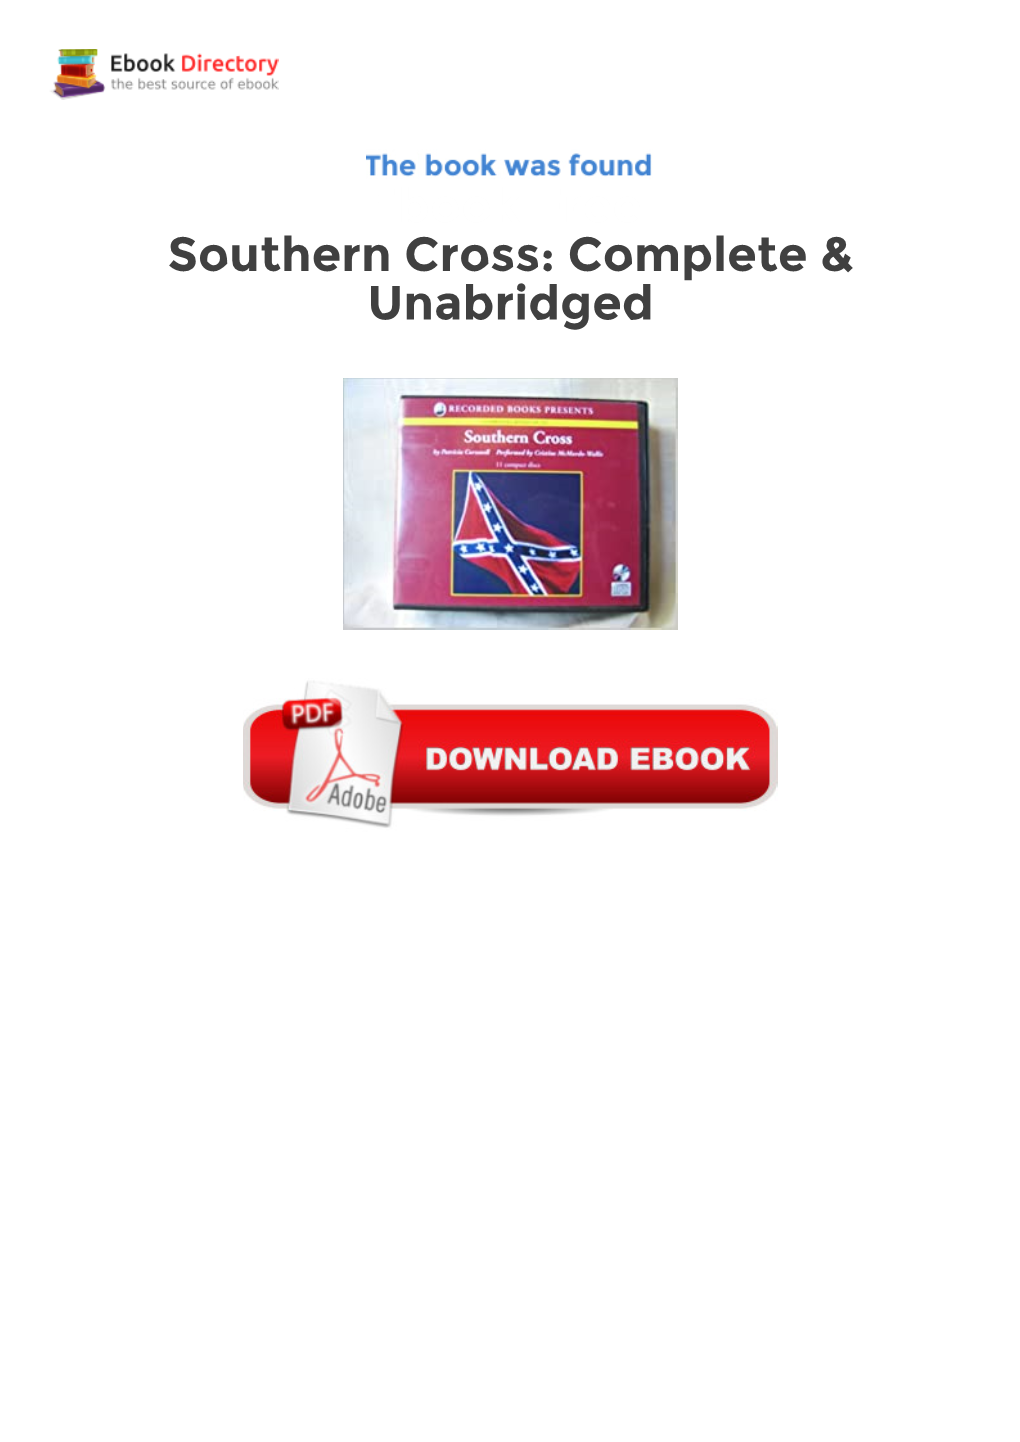 Ebook Free Southern Cross: Complete & Unabridged